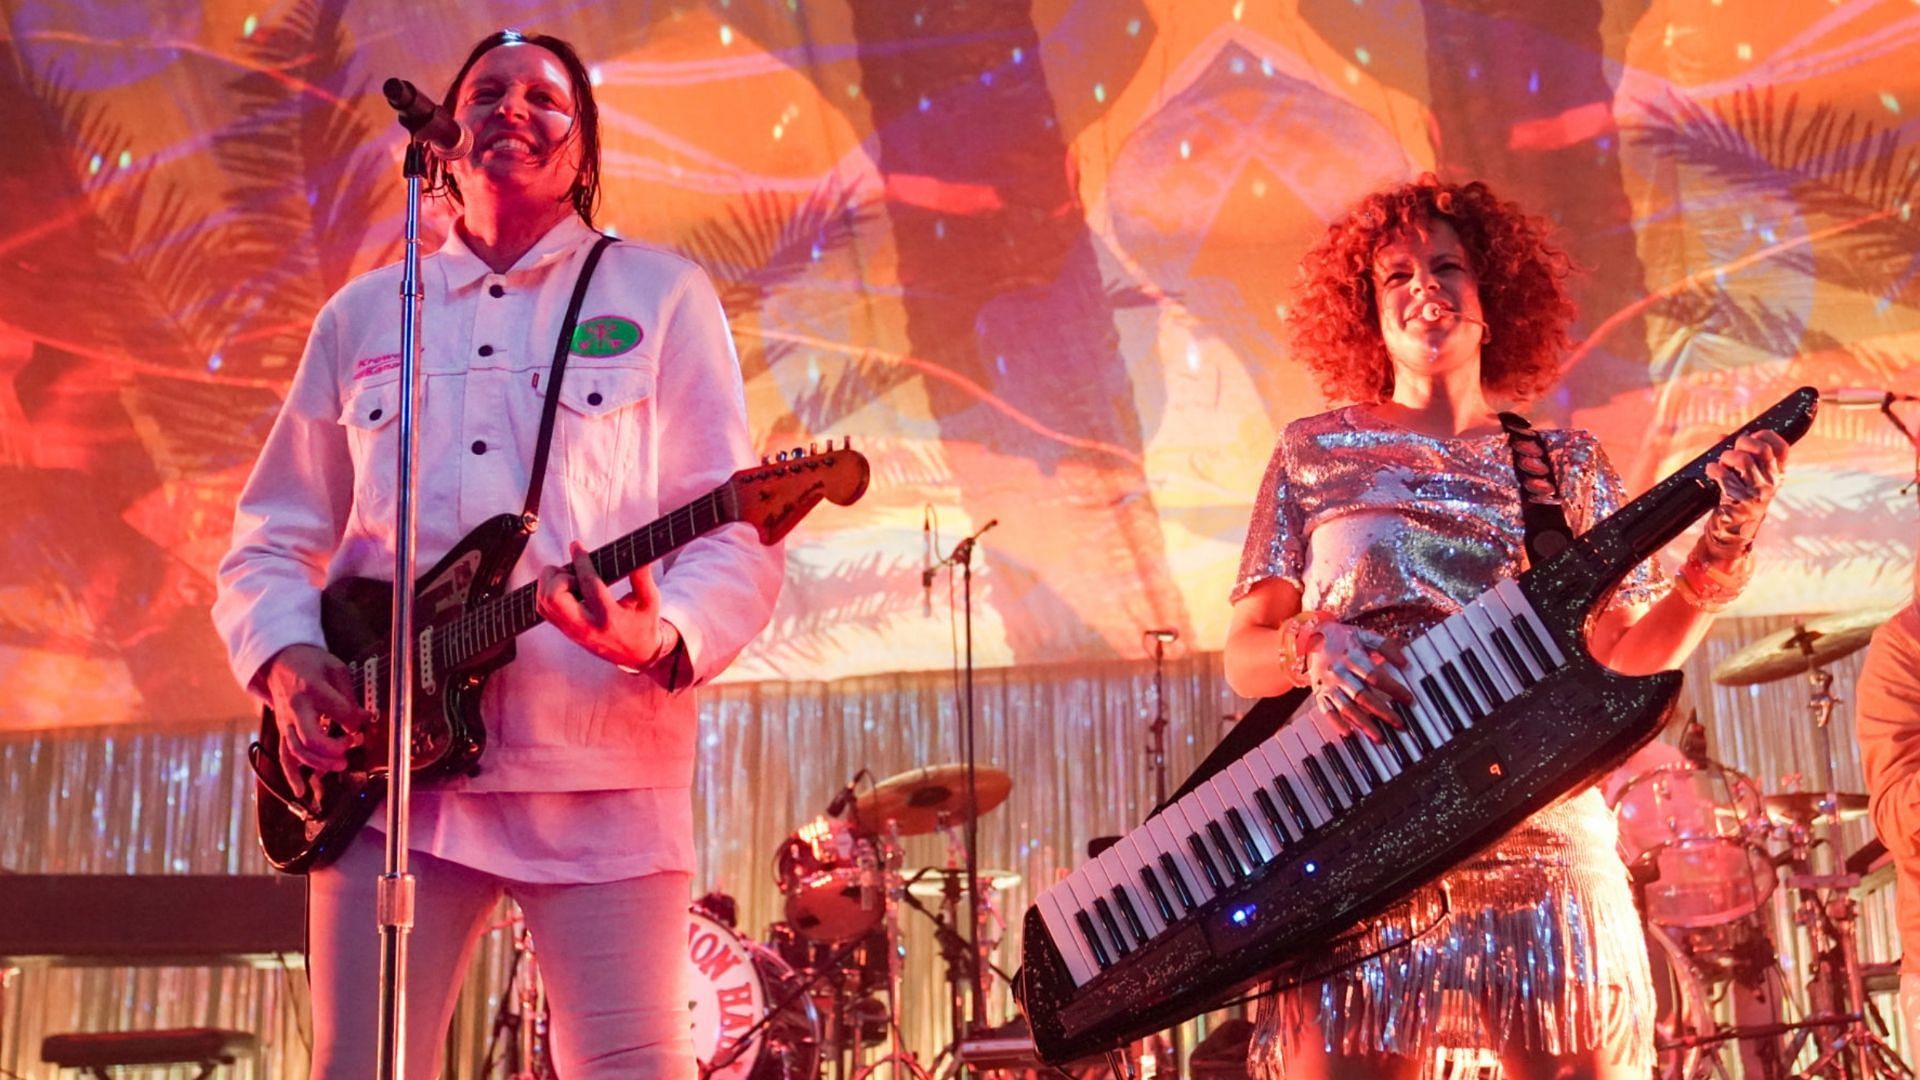 Arcade Fire Tour 2022 Tickets, presale, where to buy, dates, and more